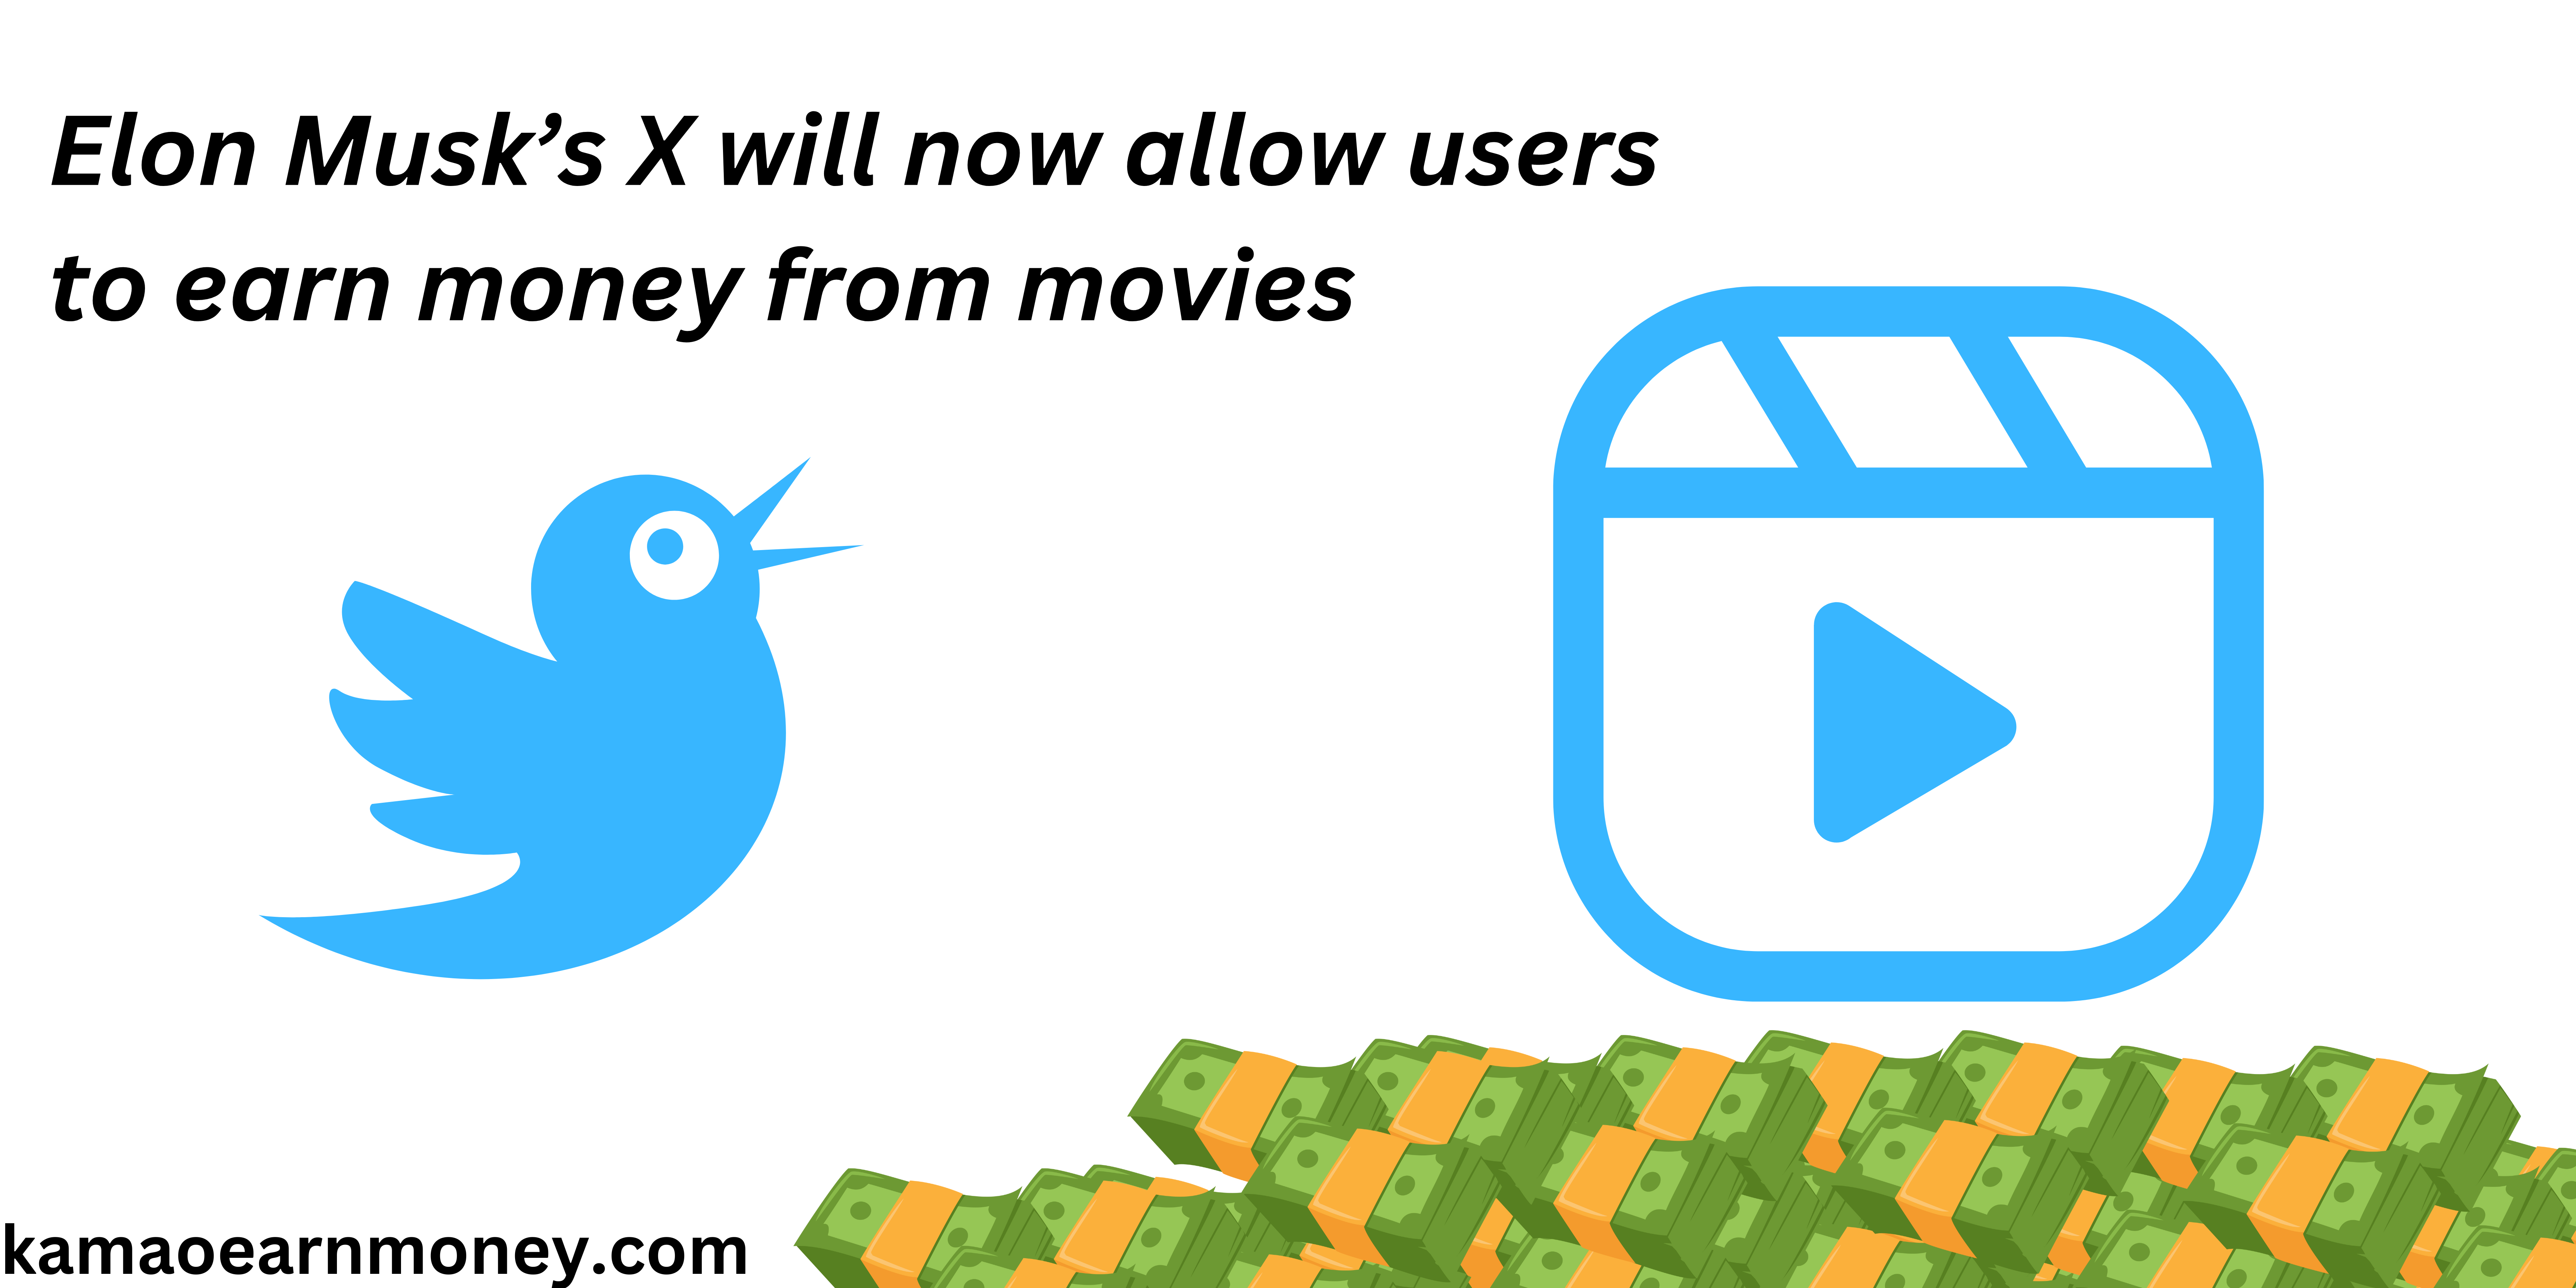 Elon Musk’s X will now allow users to earn money from movies